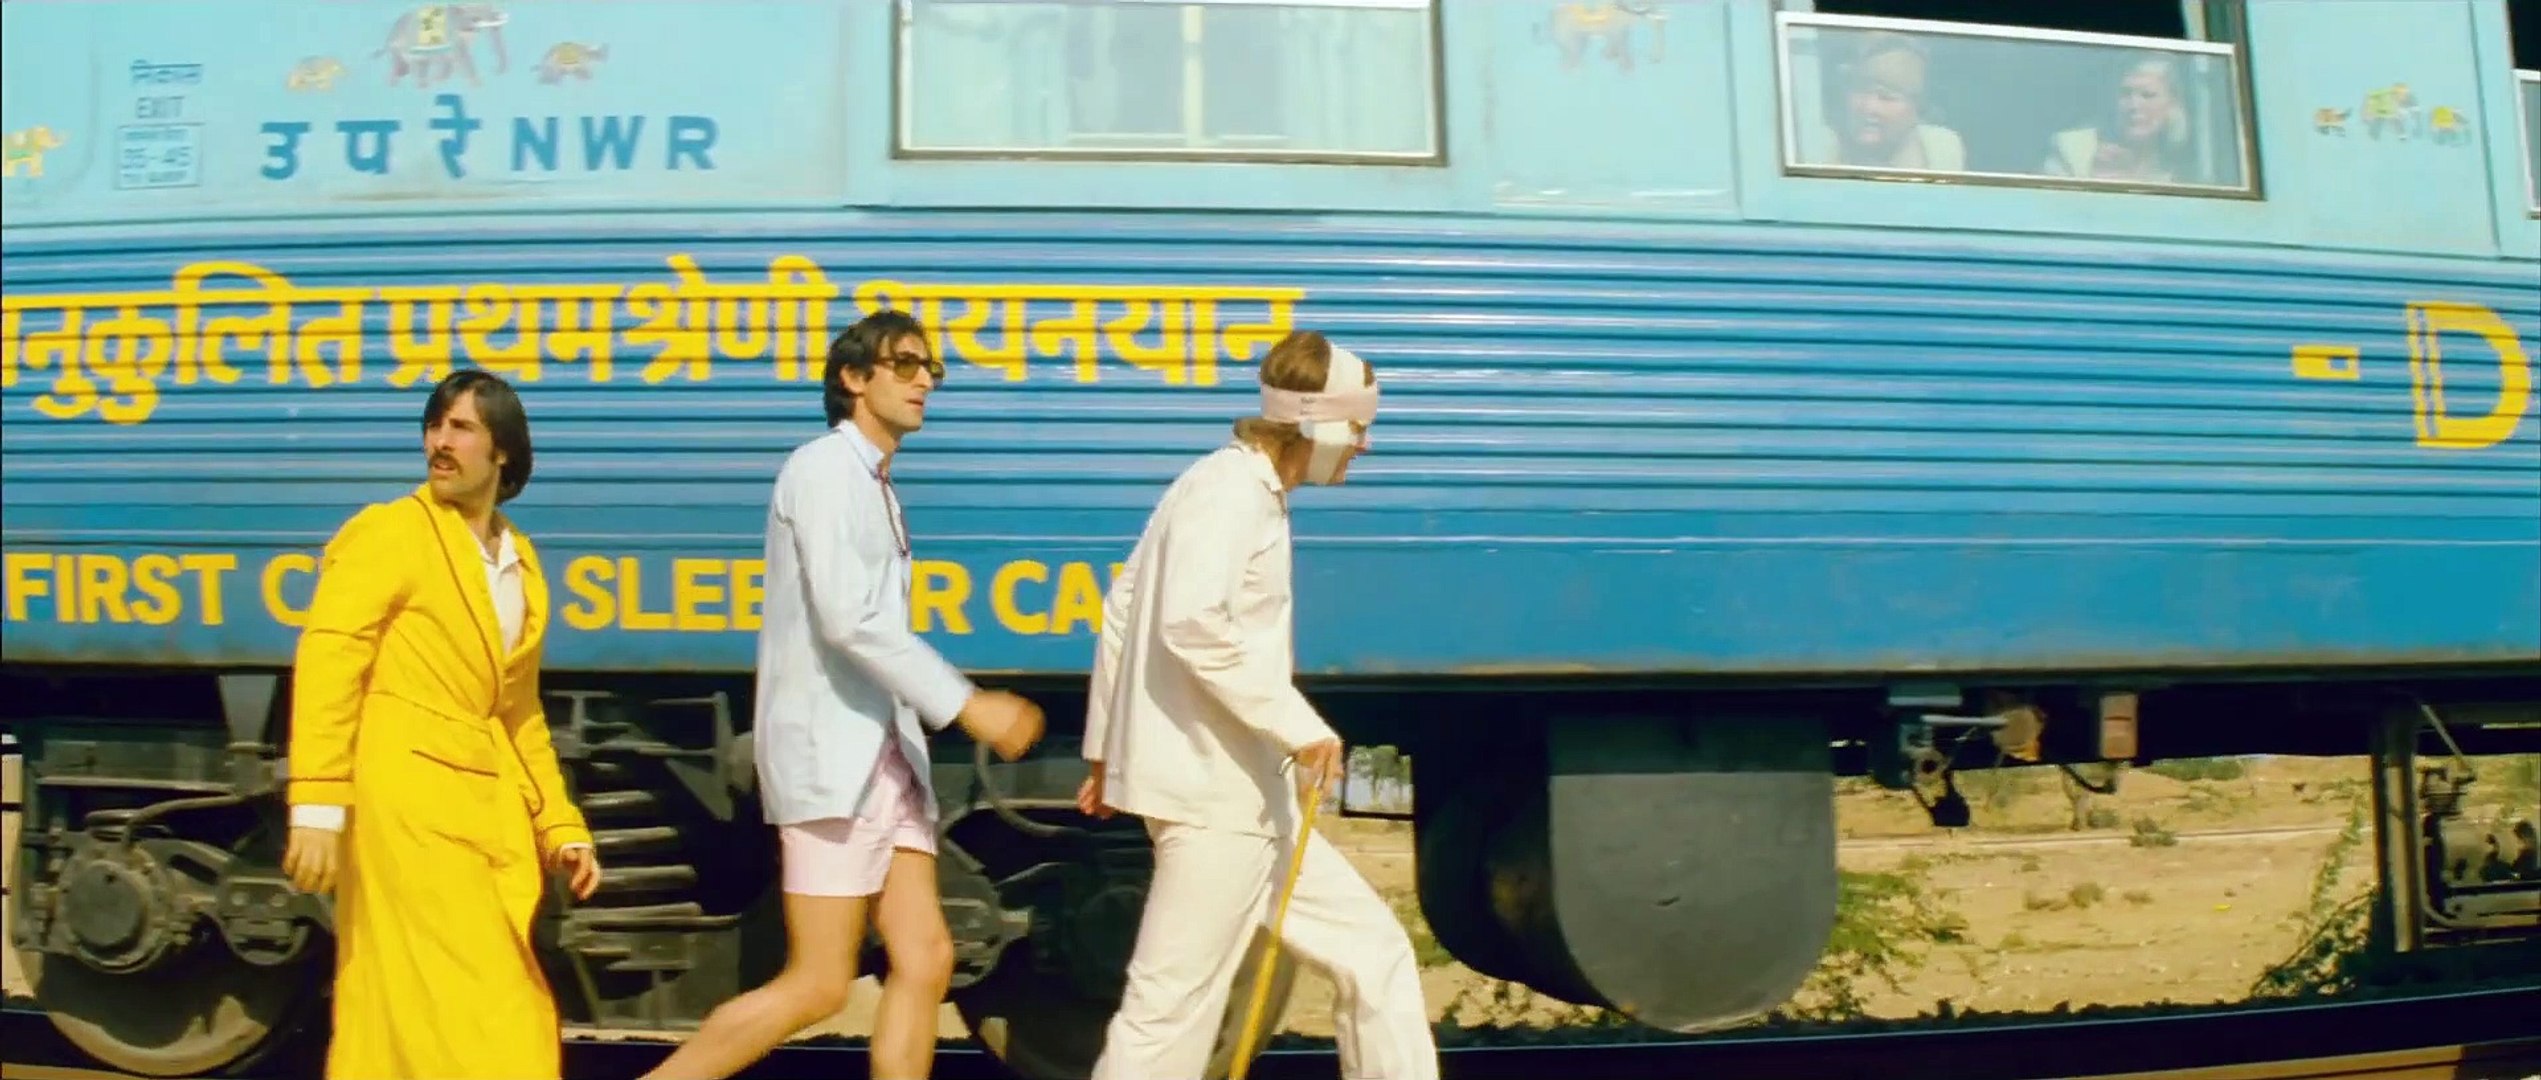 The Darjeeling Limited Trailer (2007) - video Dailymotion